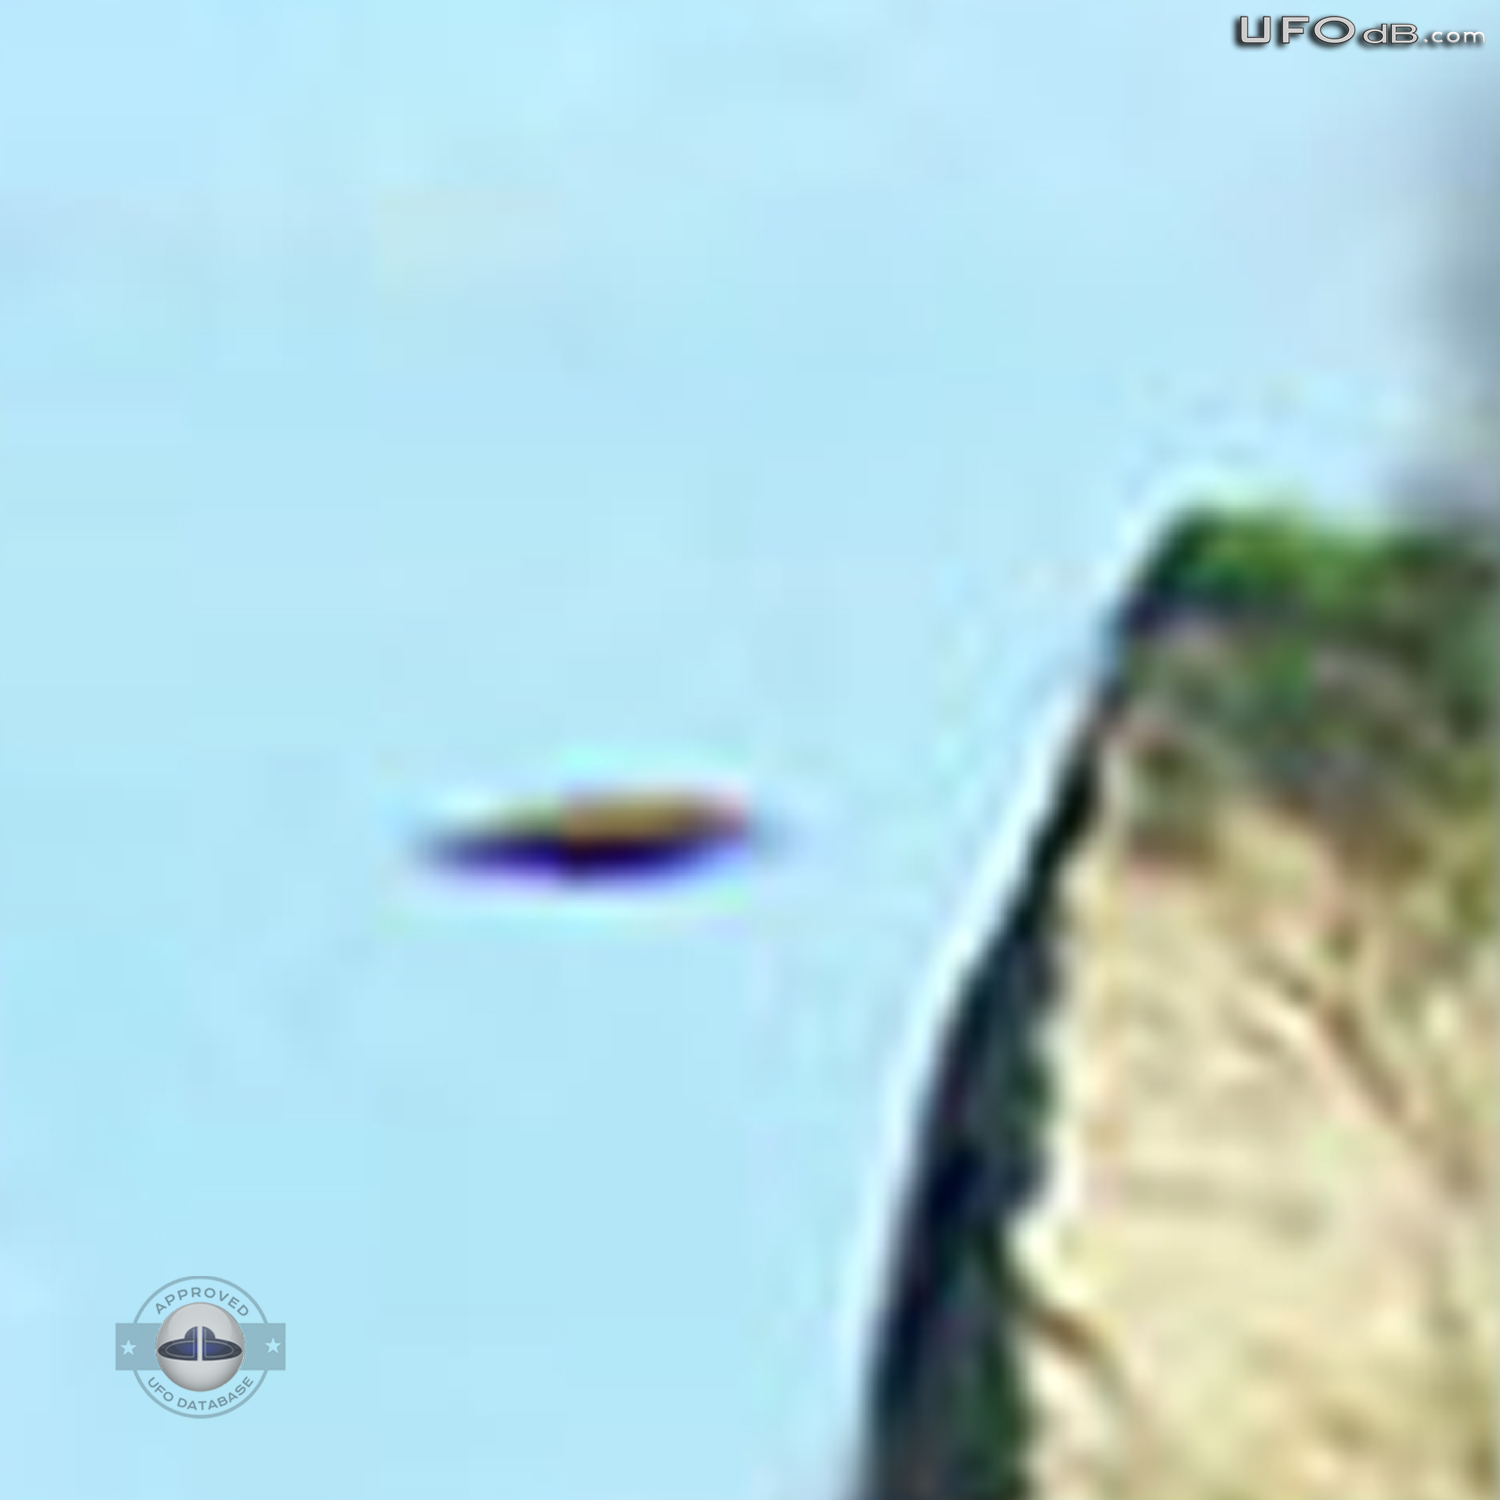 Lucky shot get a UFO on picture in Chirije | Ecuador | January 2011 UFO Picture #272-5